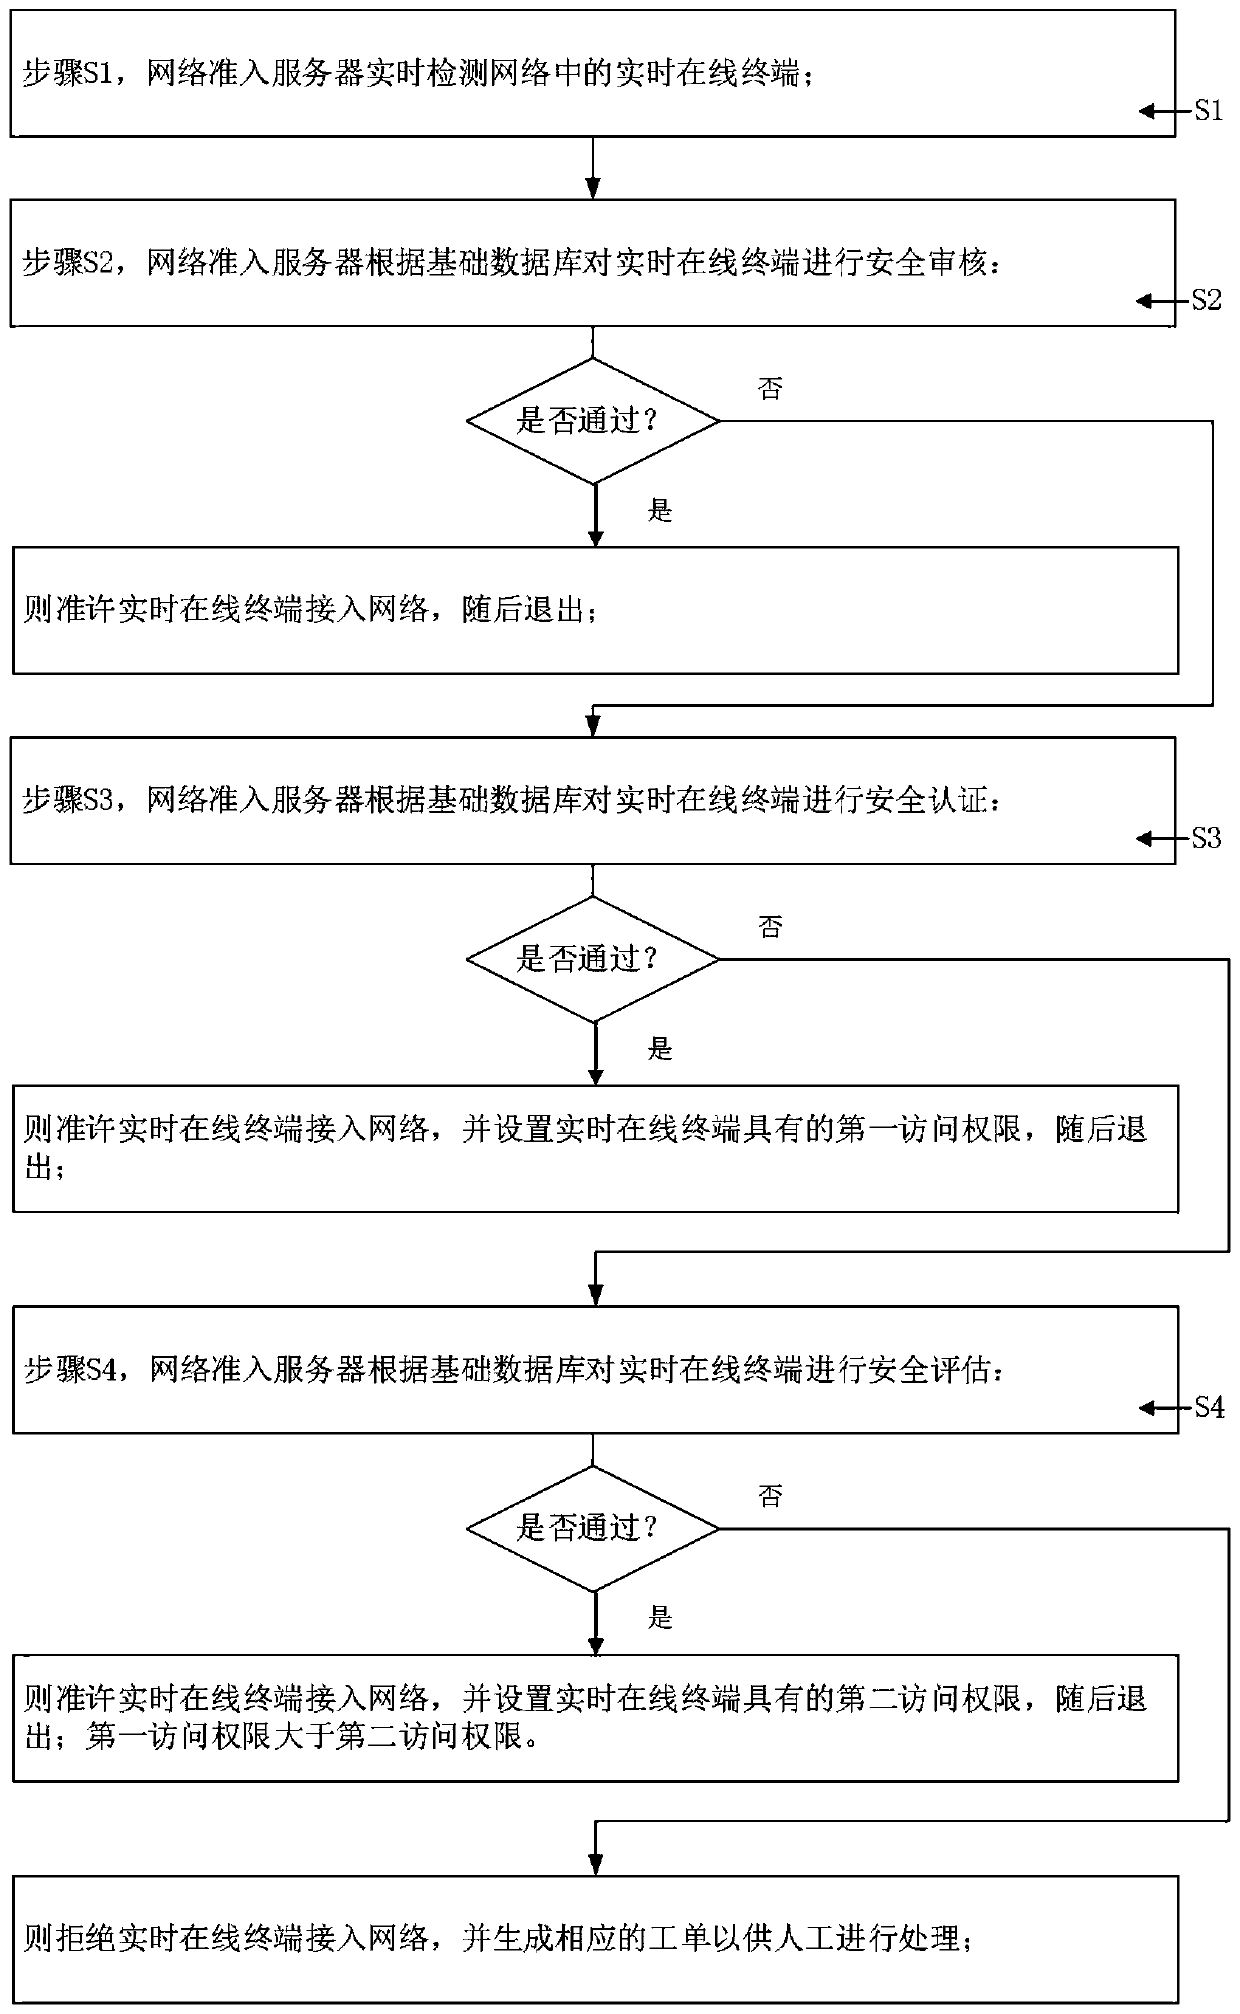 Network admission control method and system